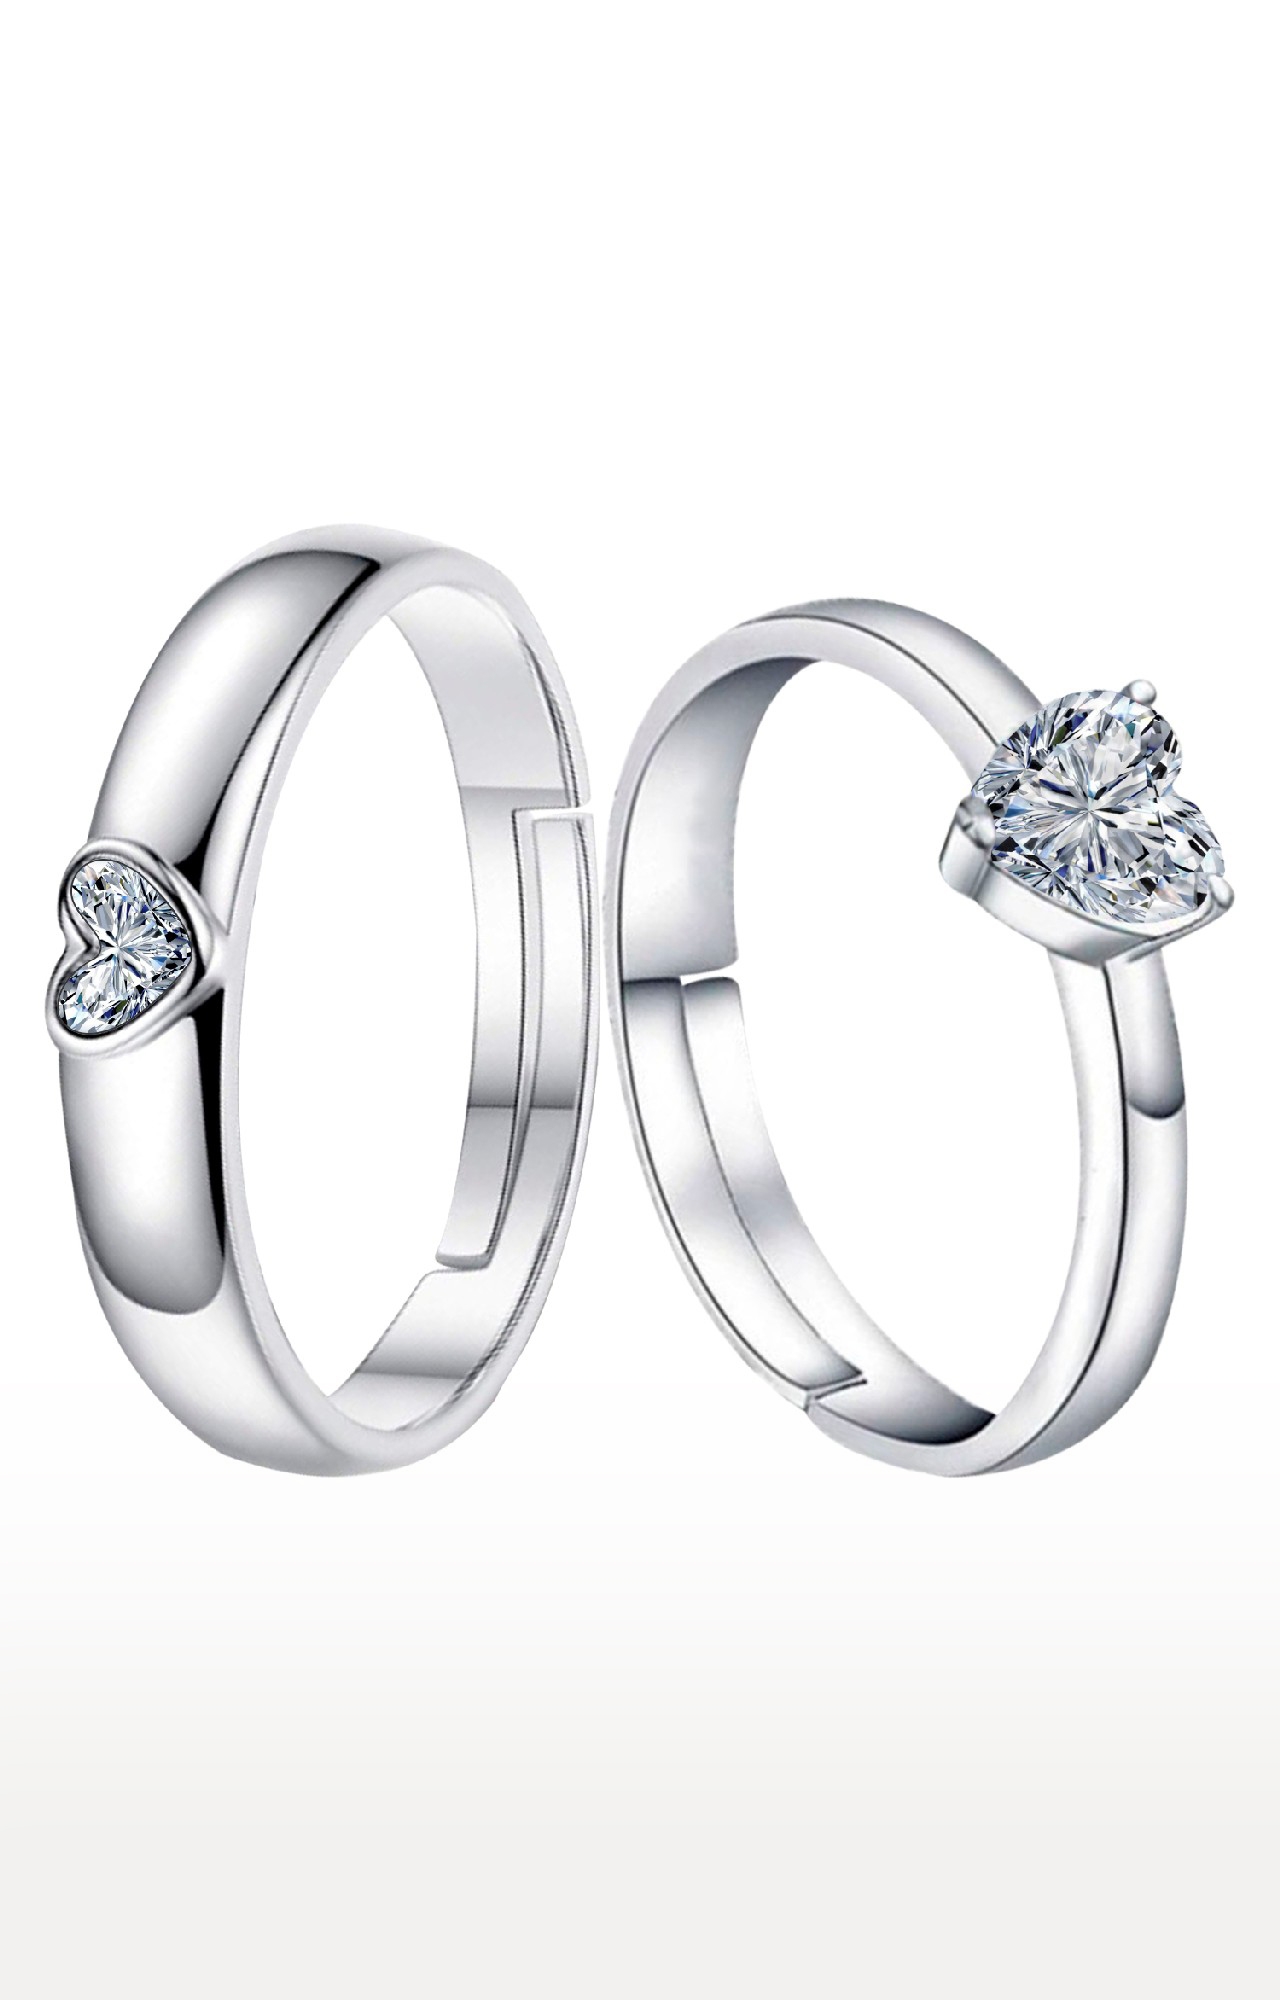 SILVER SHINE | Adjustable Couple Rings Set for lovers Silver Plated Solitaire for Men and Women-2 pieces